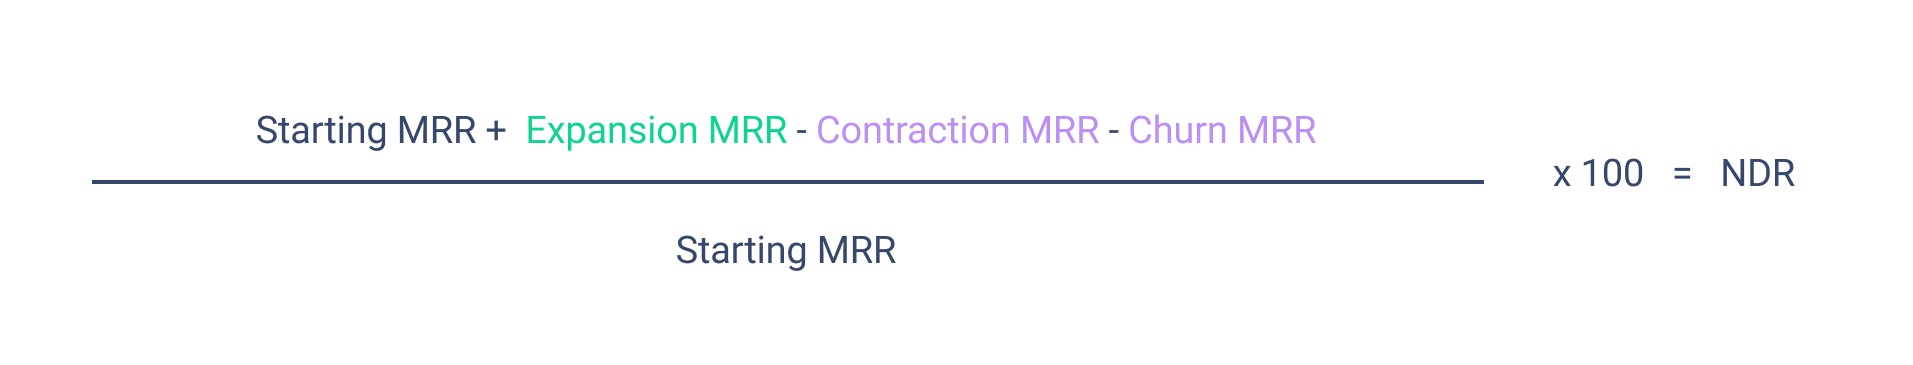 The sum of starting MRR + expansion MRR - Contraction MRR - Churn MRR is divided by starting MRR and times by 100 to calculate NDR